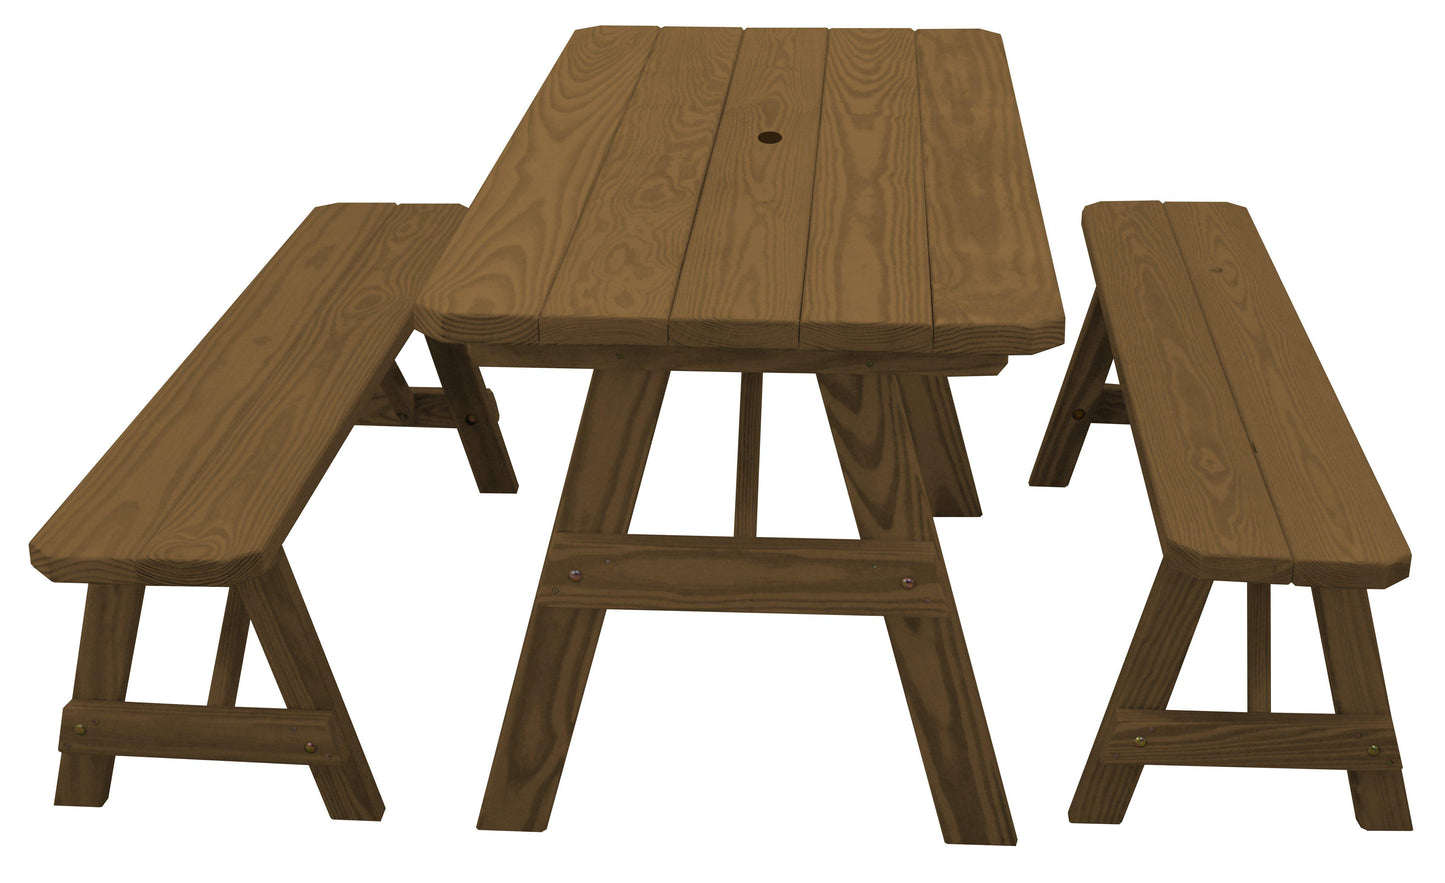 A&L Furniture Co. Yellow Pine Traditional 5' Table with 2 Benches - LEAD TIME TO SHIP 10 BUSINESS DAYS